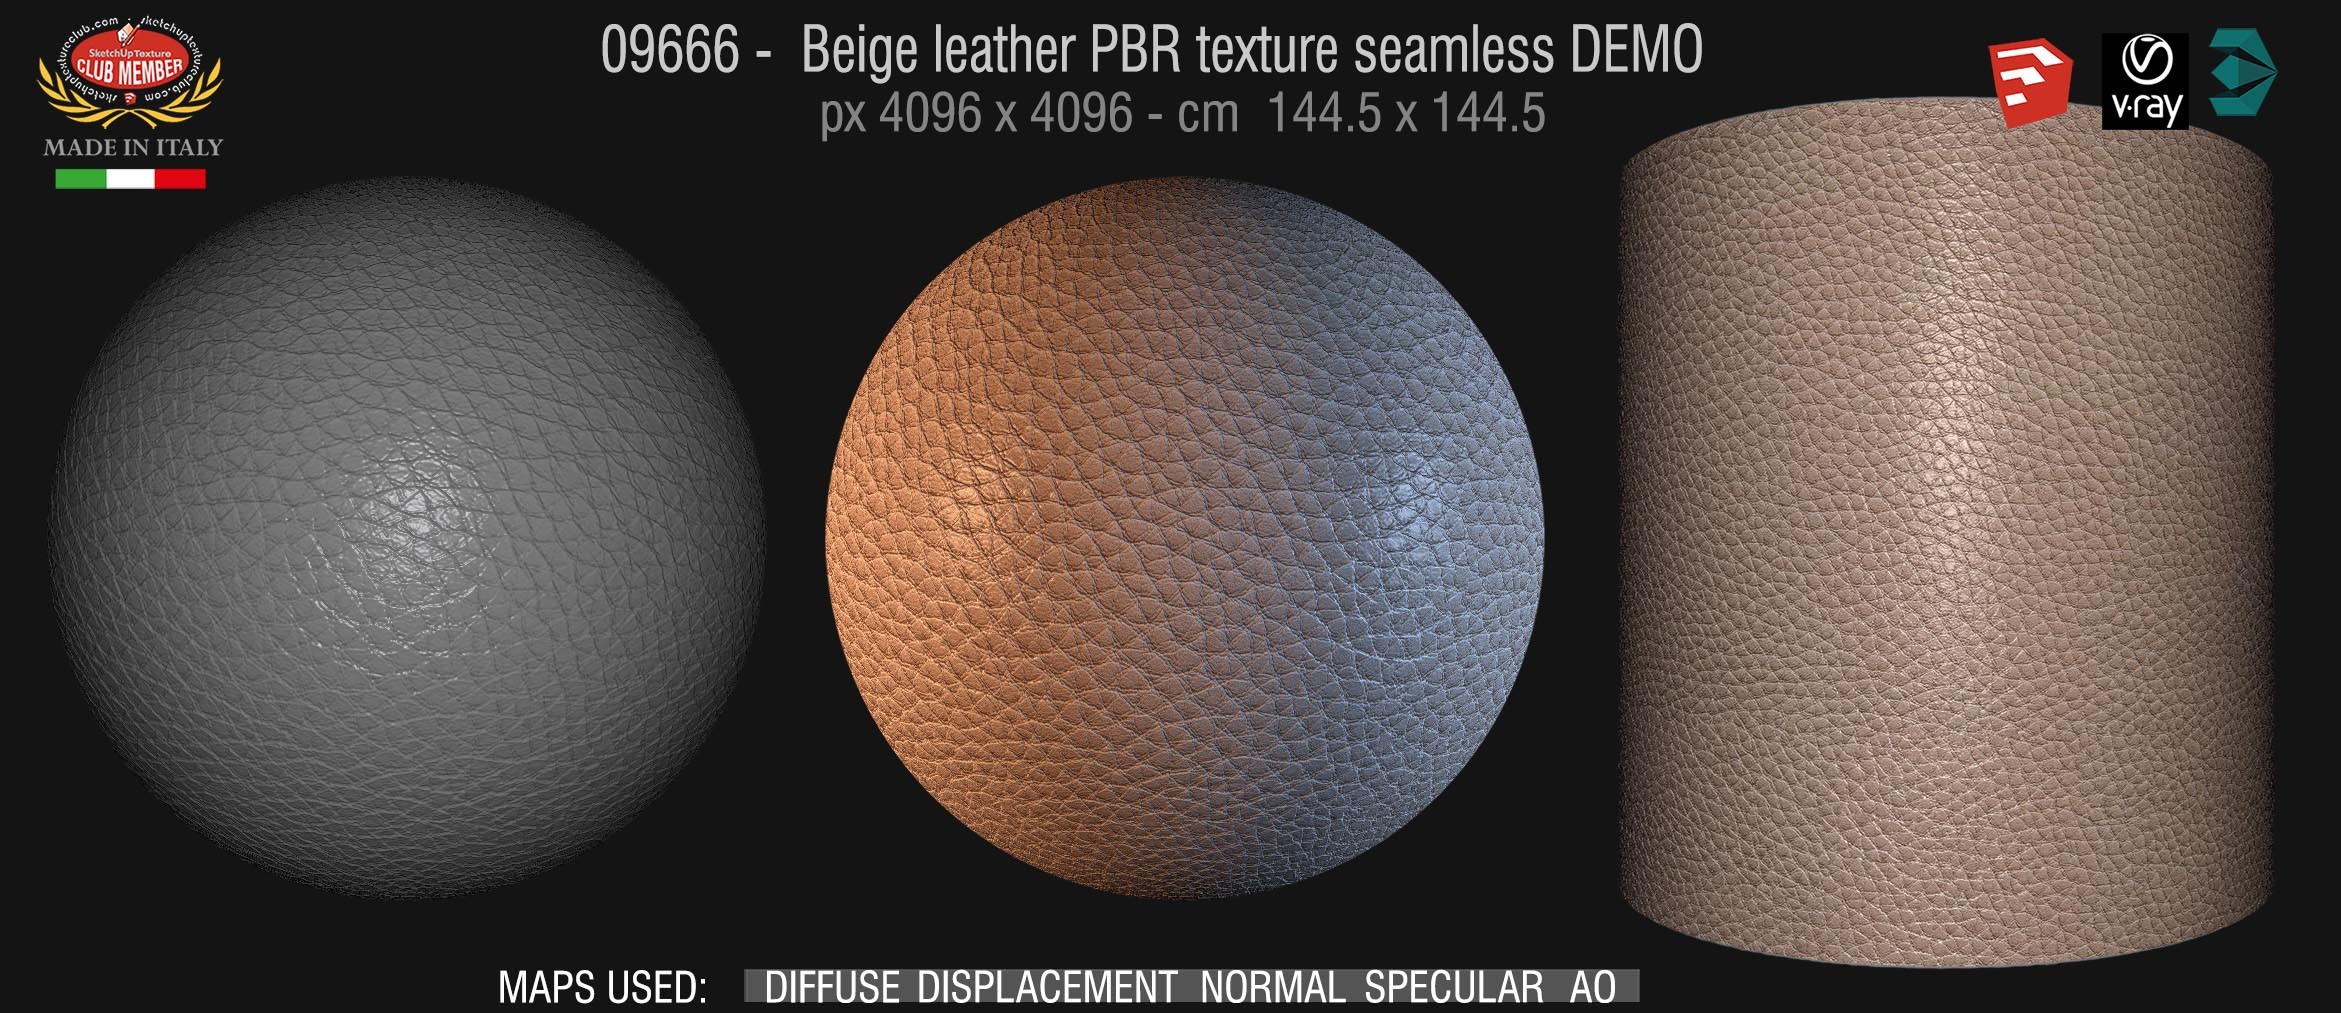 09666 Beige leather PBR texture seamless DEMO